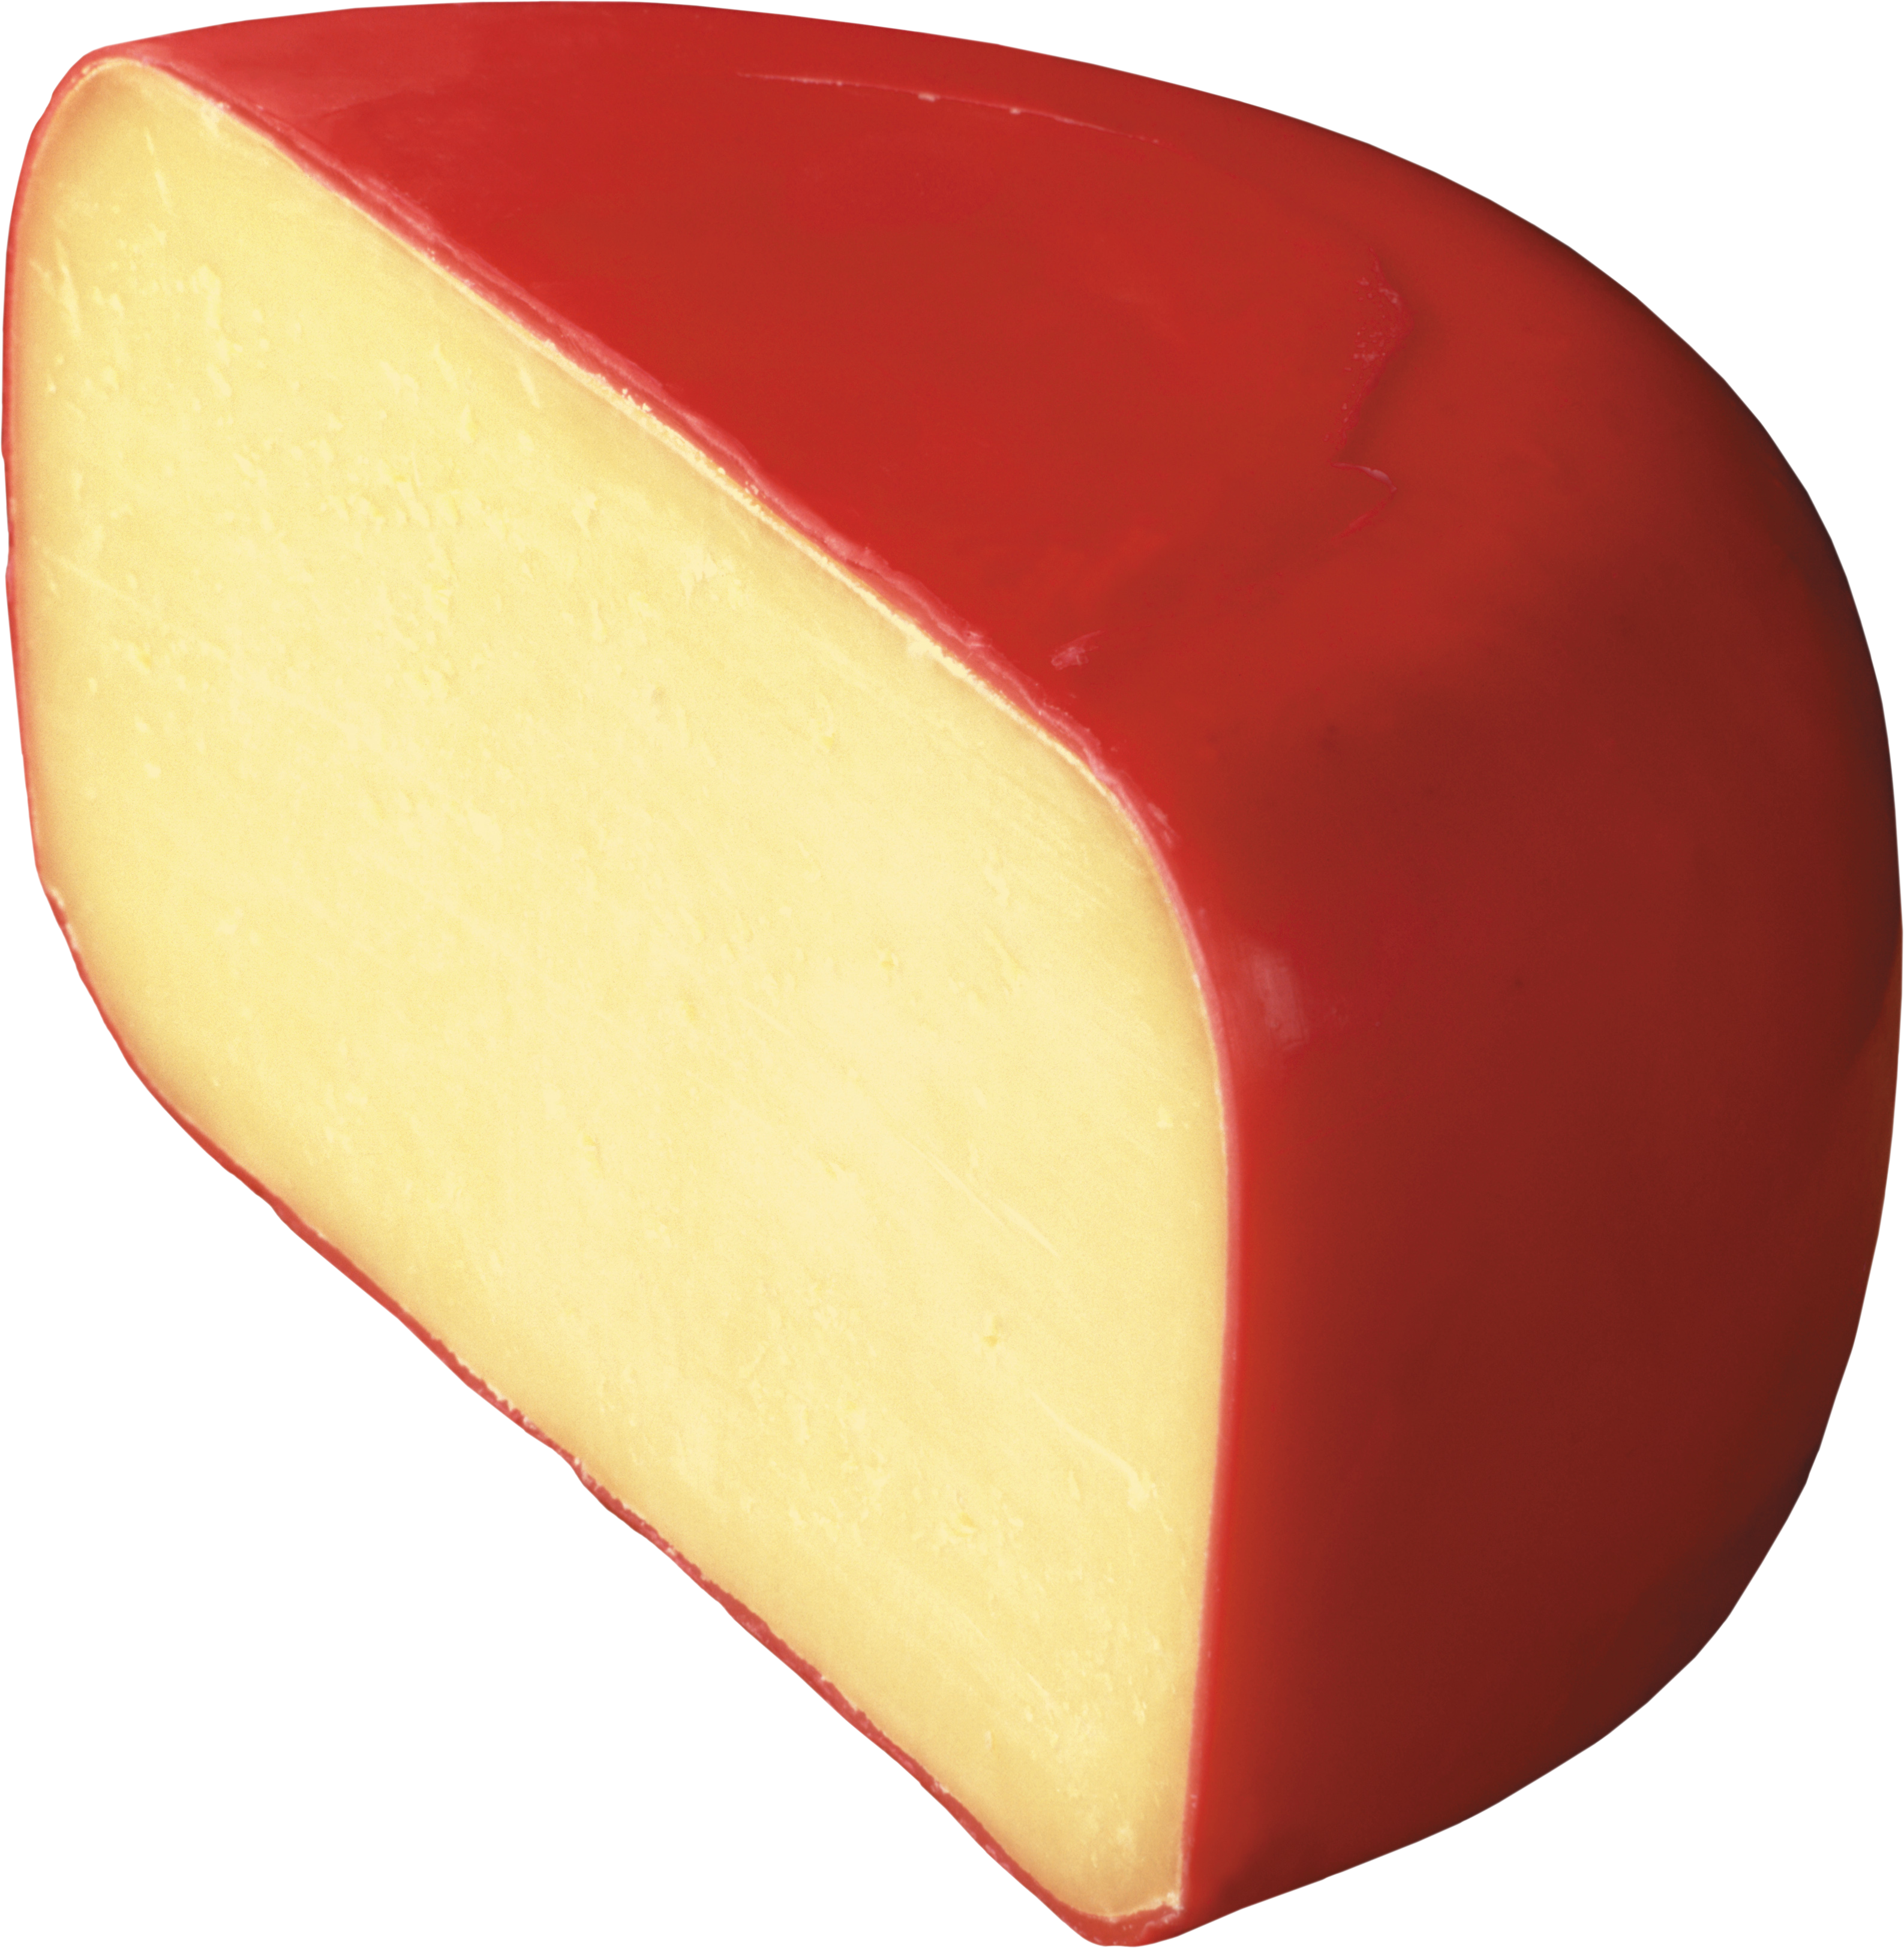 Cheese Illustration Png Picpng